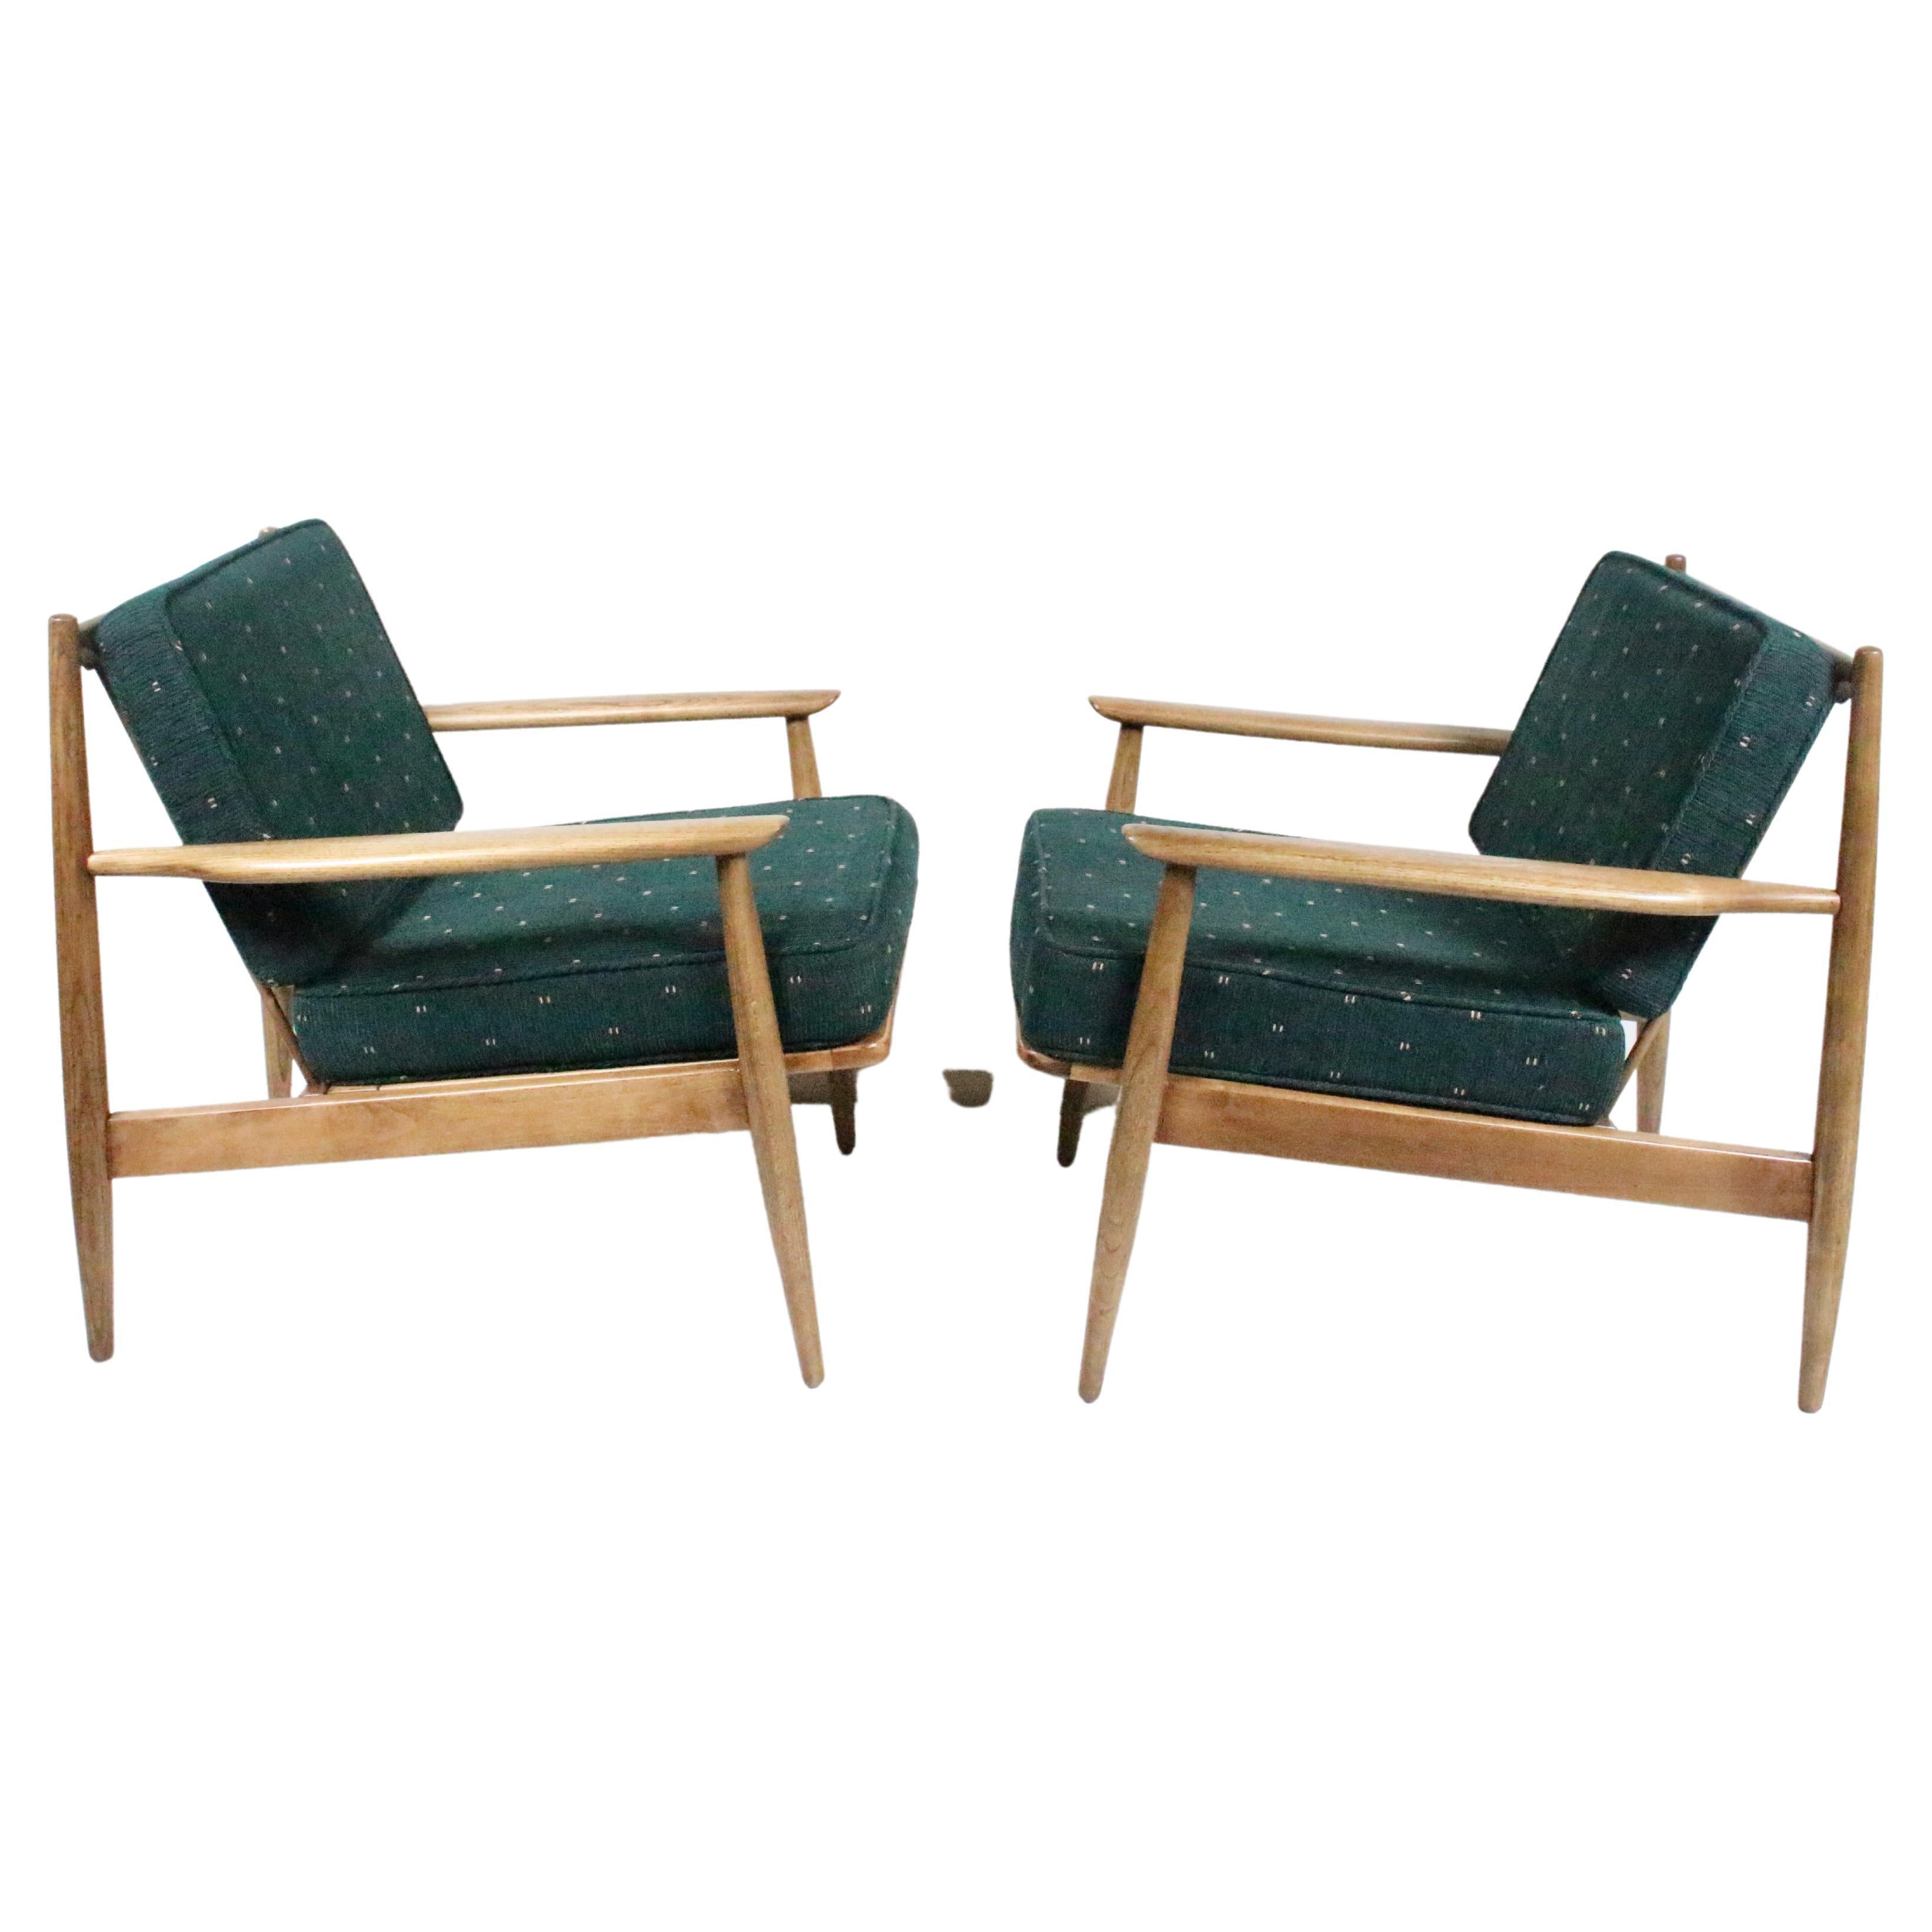 Pair of Danish Modern Viko Baumritter Style Walnut Lounge Chairs, 1950s For Sale 2